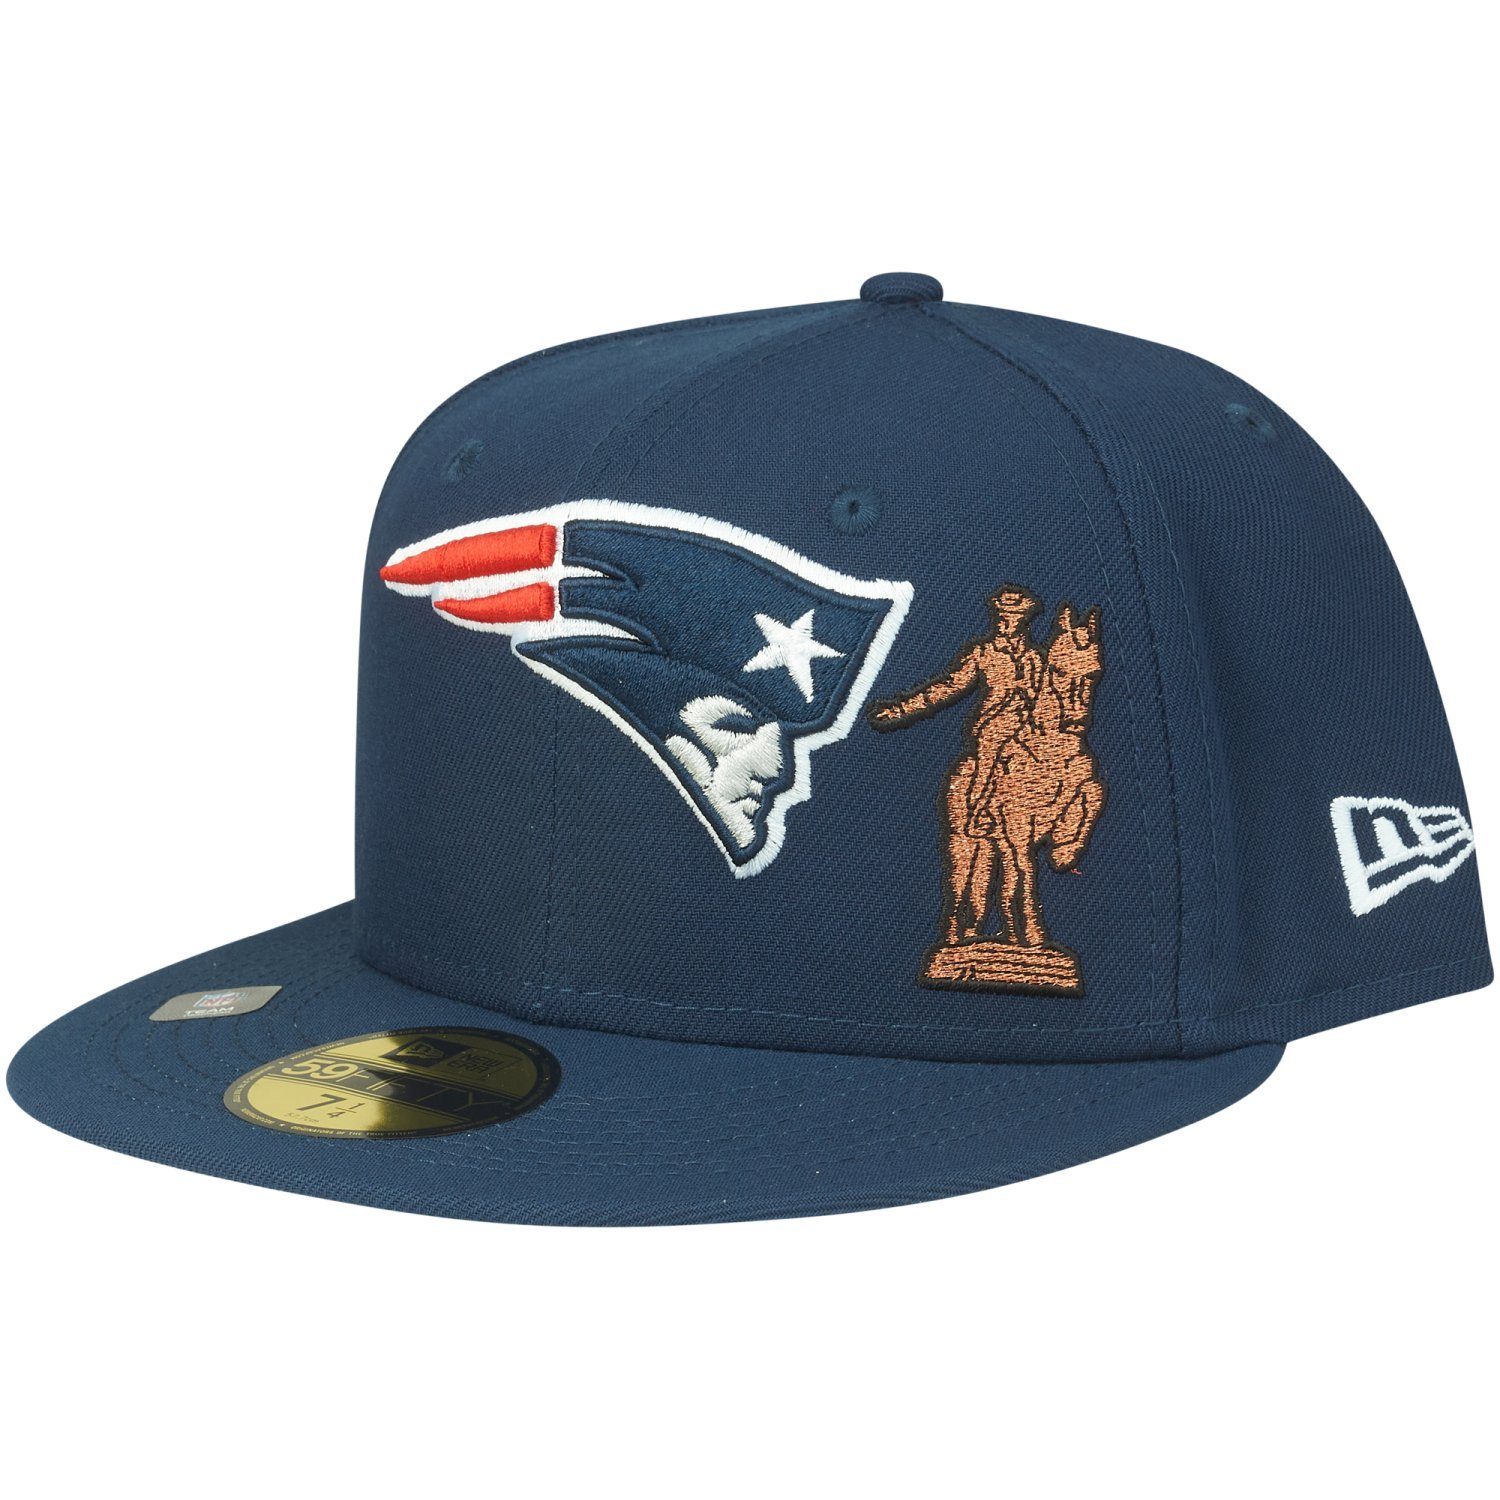 New Era 59Fifty England Fitted Patriots CITY Cap New NFL